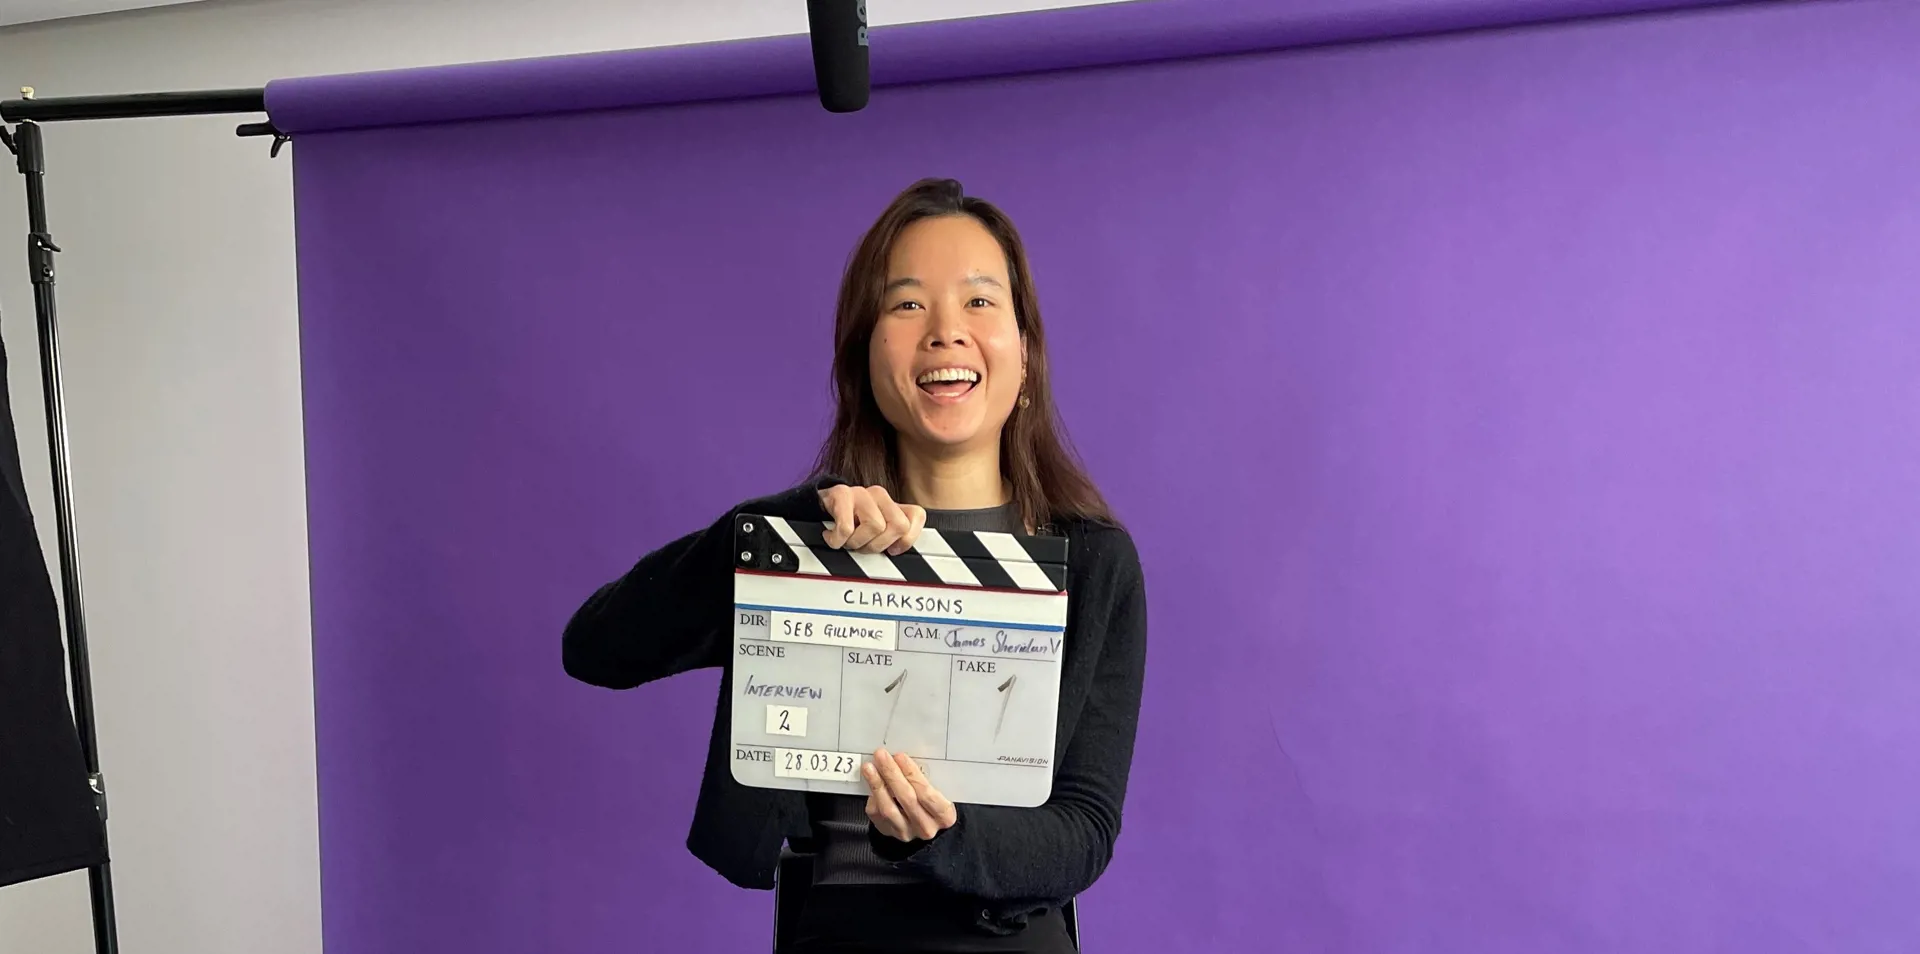 woman sitting on a stool behind a purple background, smiling, holding a clapper